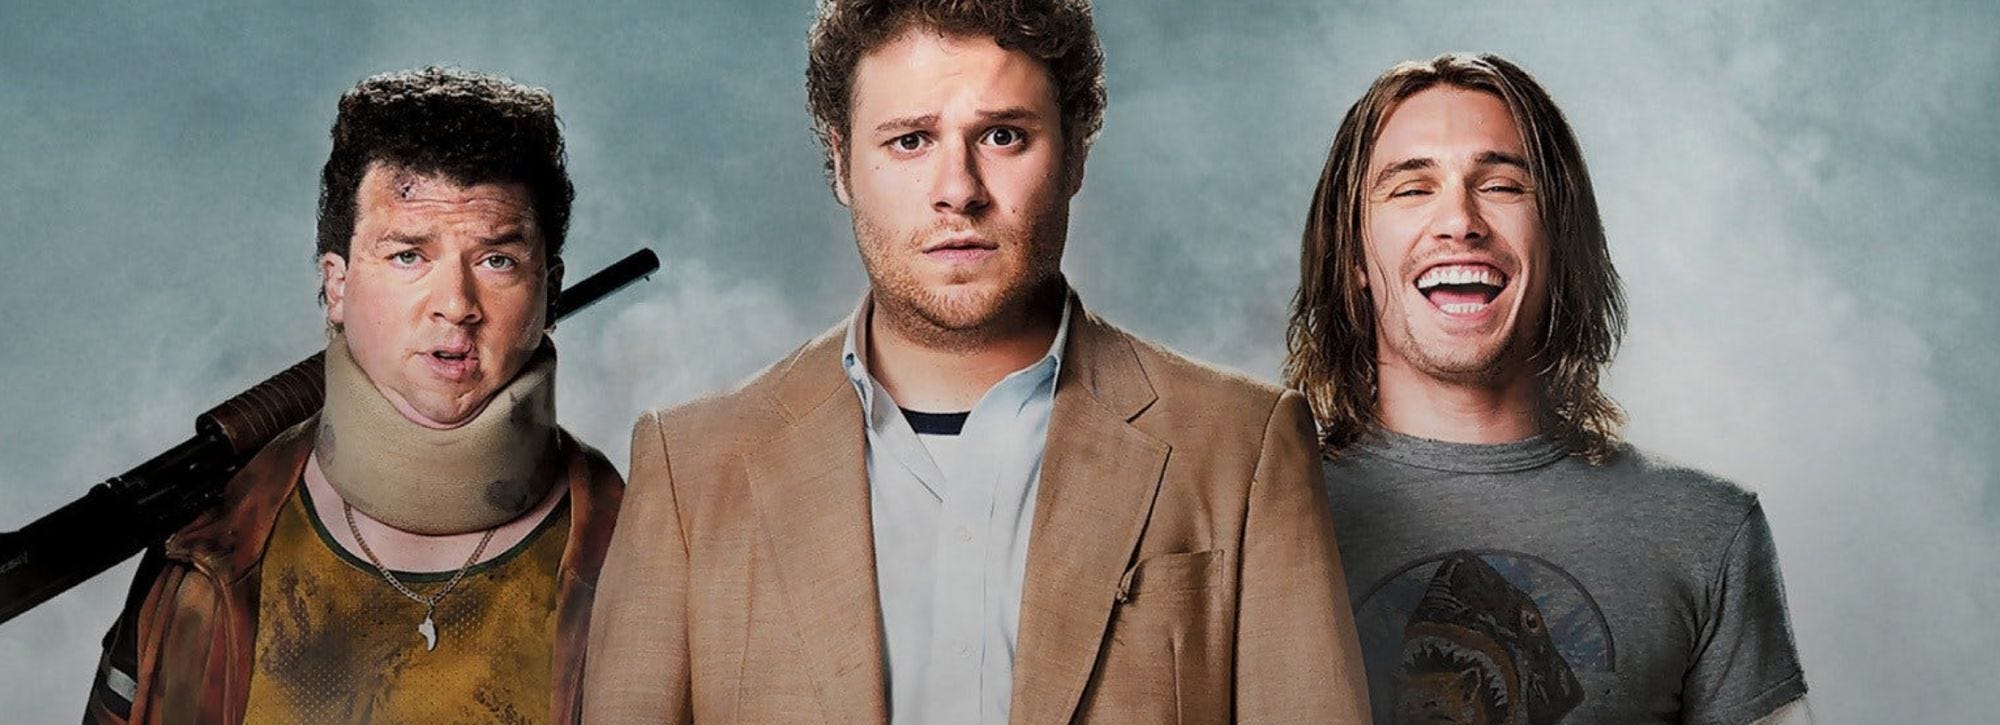 Promo pic for Pineapple Express.